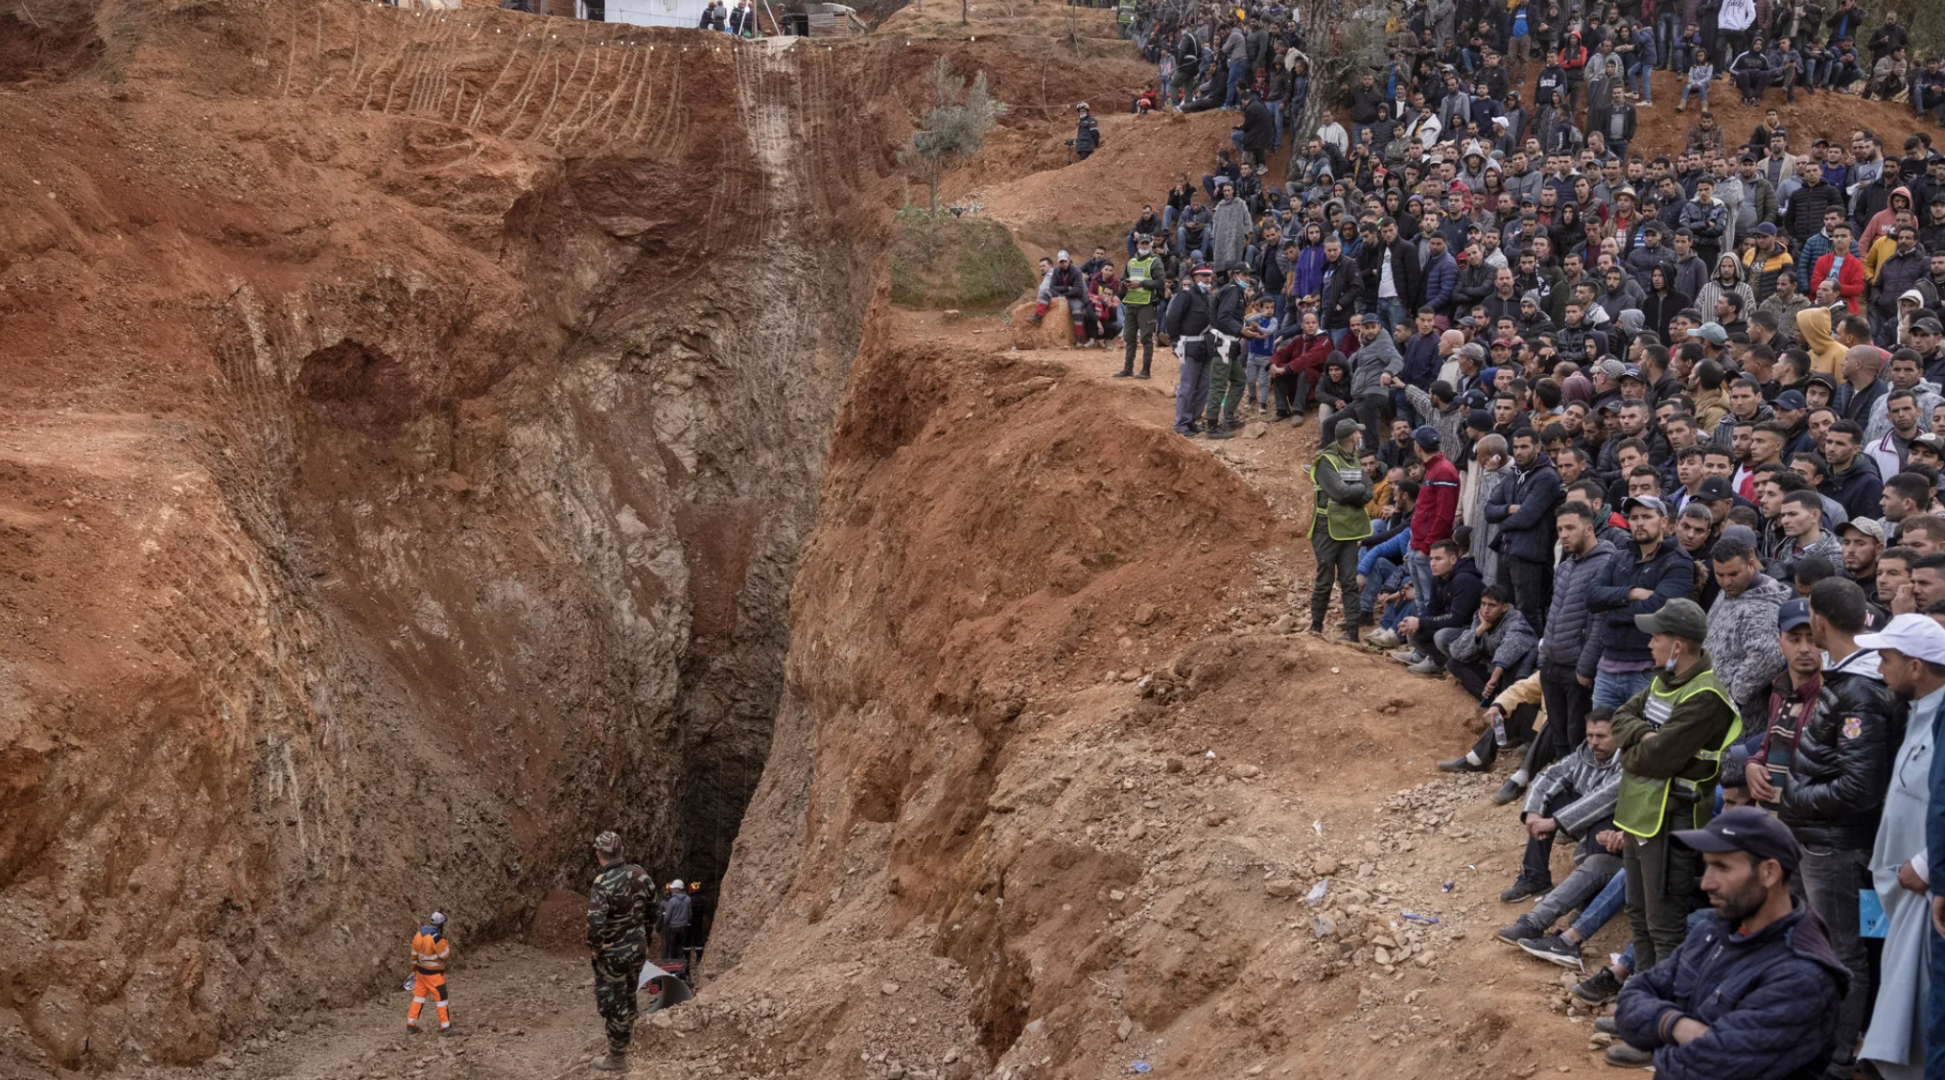 Rescuers Pull Out Boy Trapped in Well in Morocco